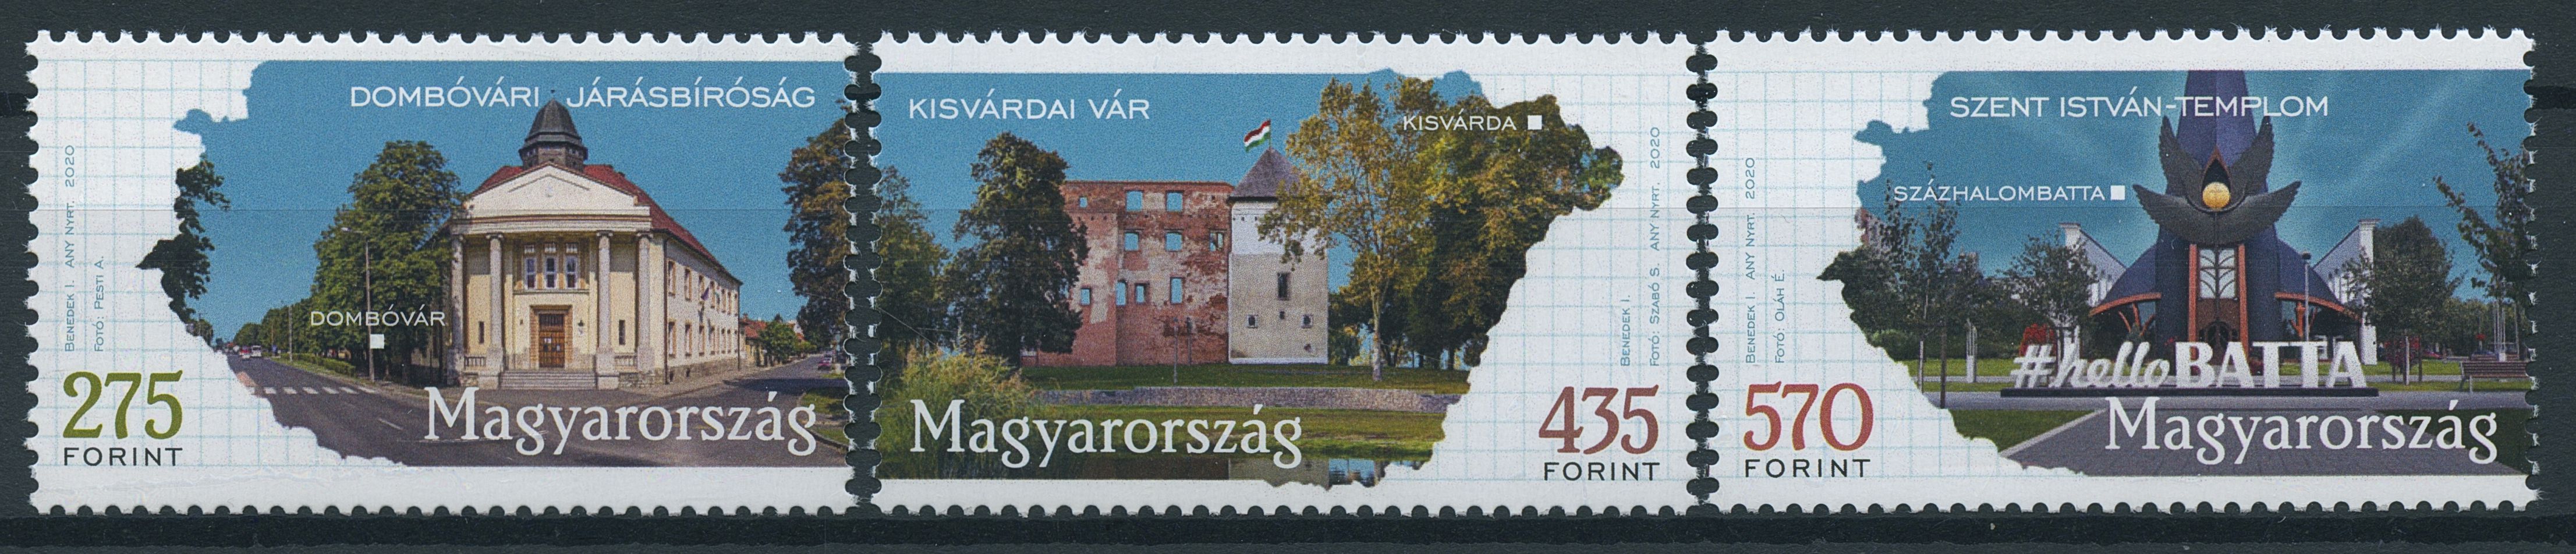 Hungary Architecture Stamps 2020 MNH Regions & Towns Part III Tourism 3v Set